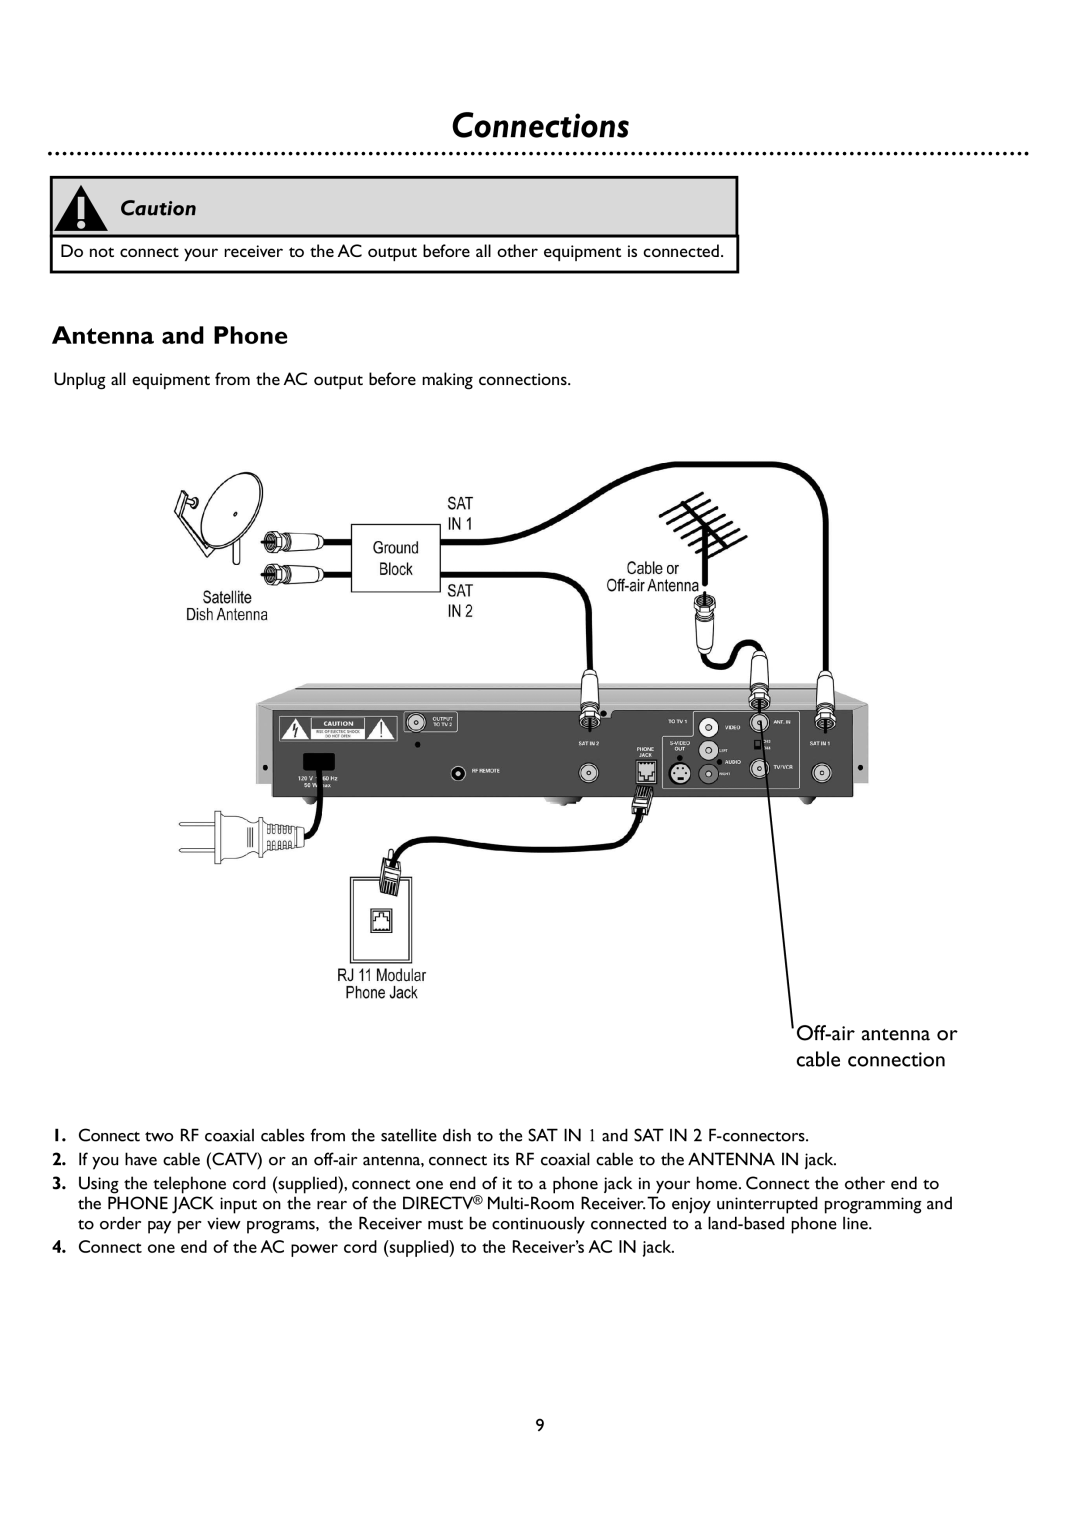 DirecTV DSR 660 manual Connections, Antenna and Phone, sCaution, Off-airantenna or cable connection 